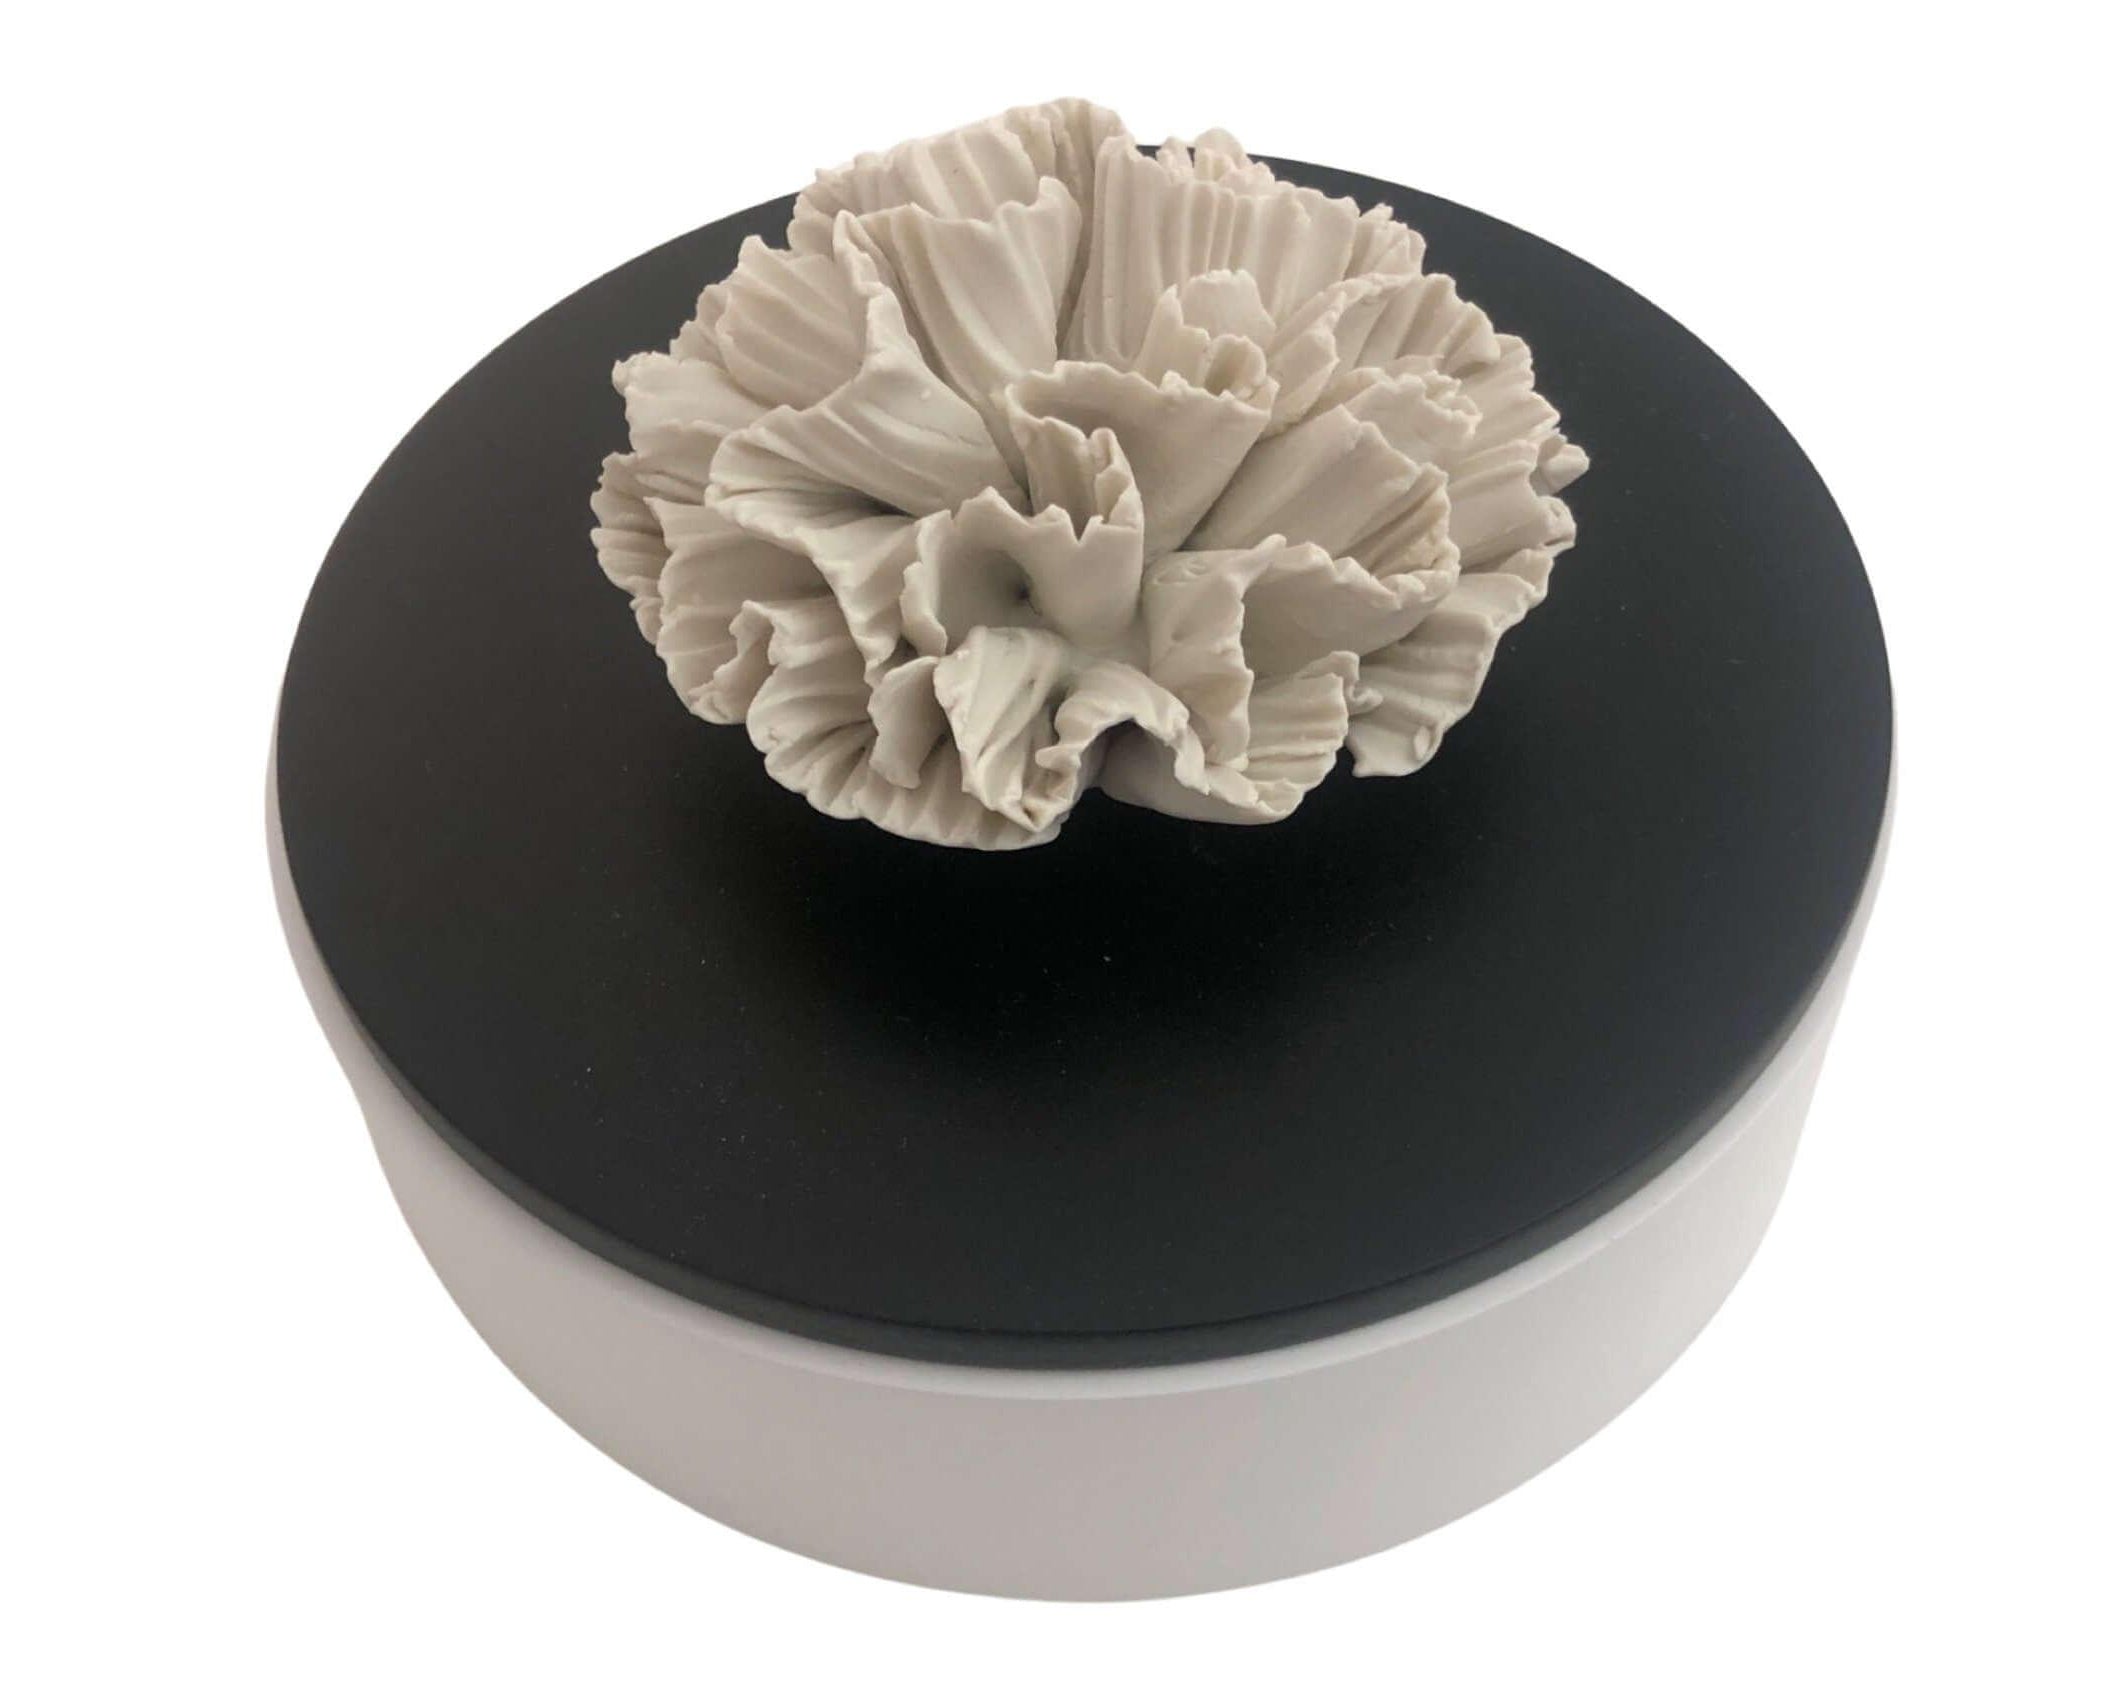 Aroma Diffusor | Duftstein | Duft Blume auf Holzschale - Roo's Gift Shop